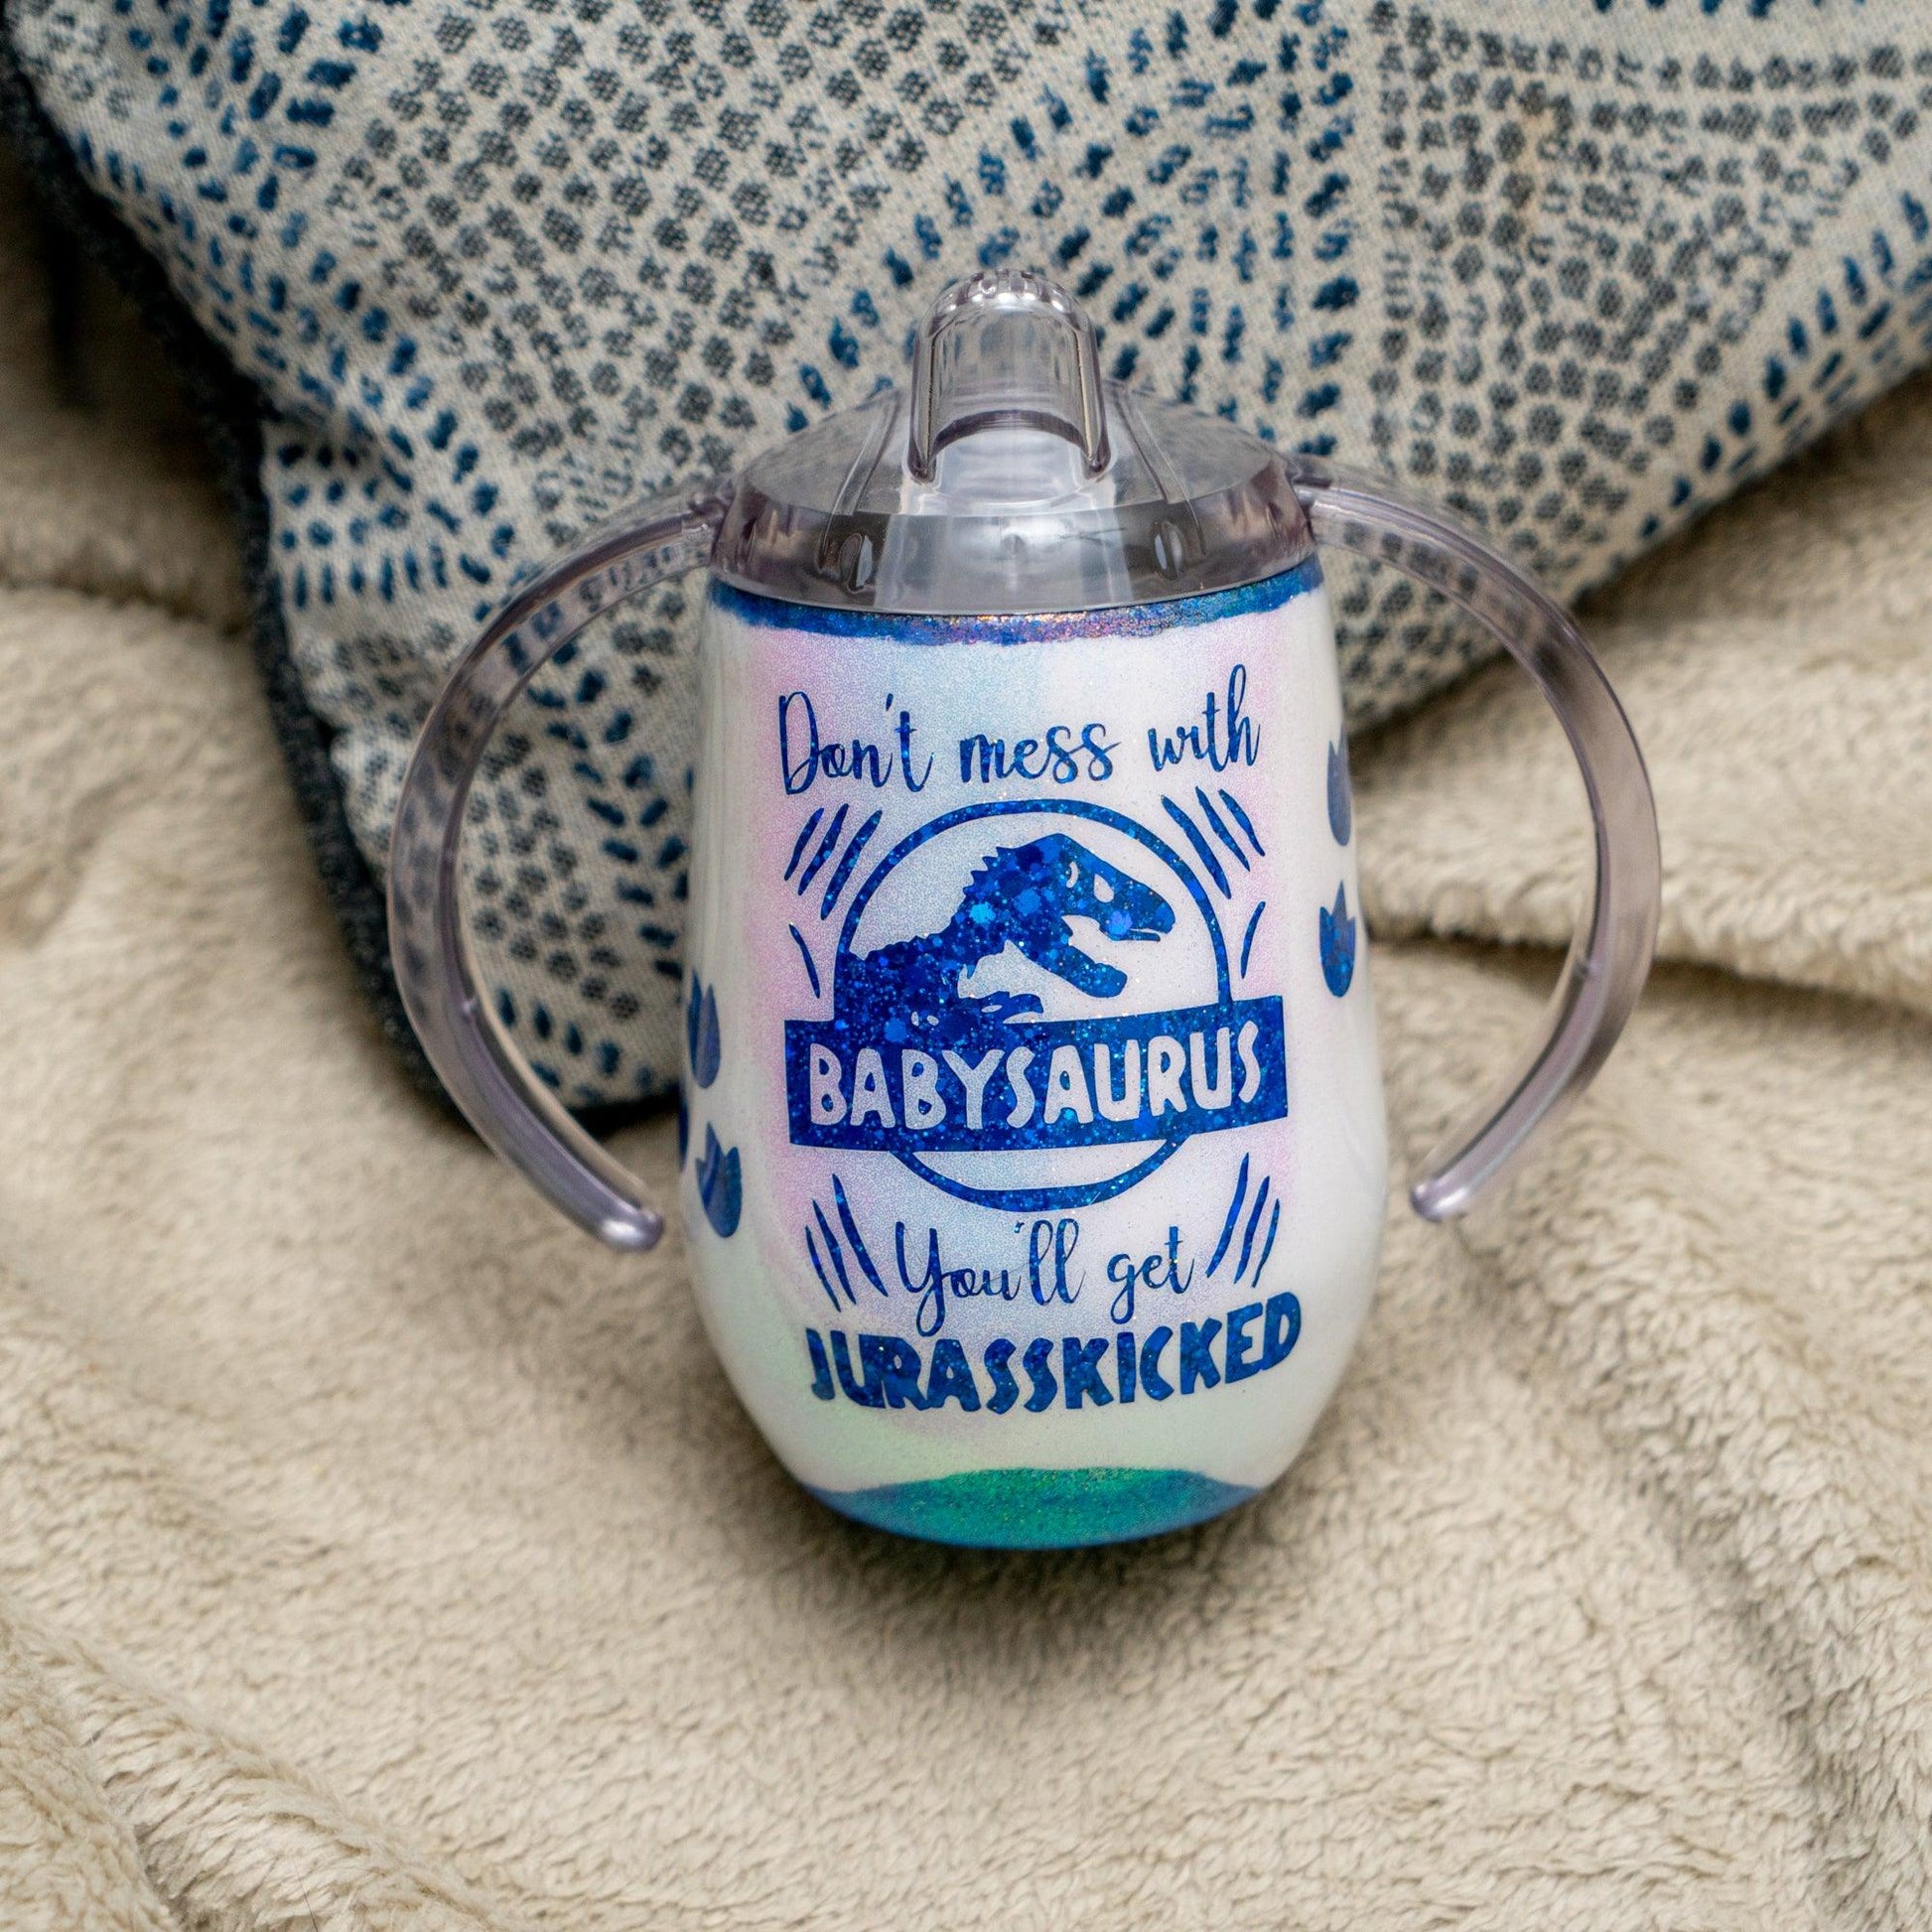 Just Me Personalized Toddler 8oz. Sippy Cup